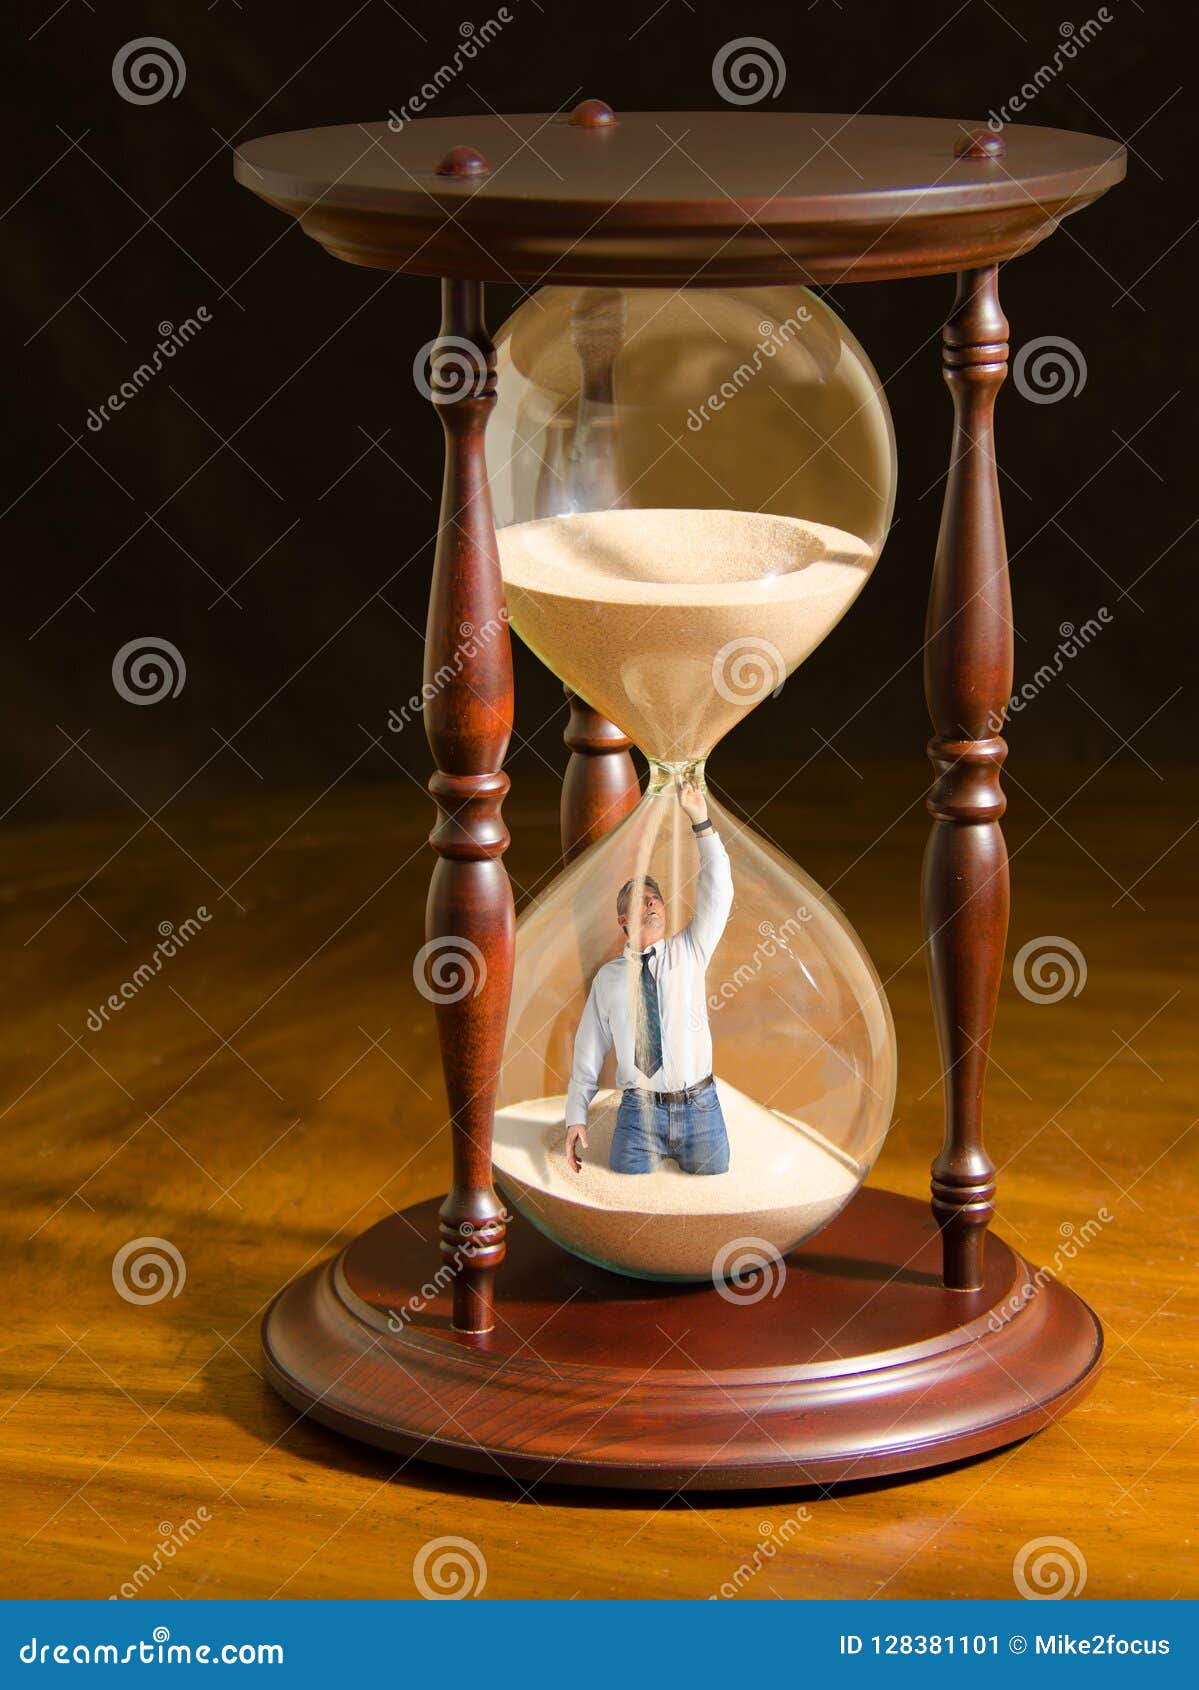 man plugging hole inside hour glass trying to slow the flow of sand and stop time